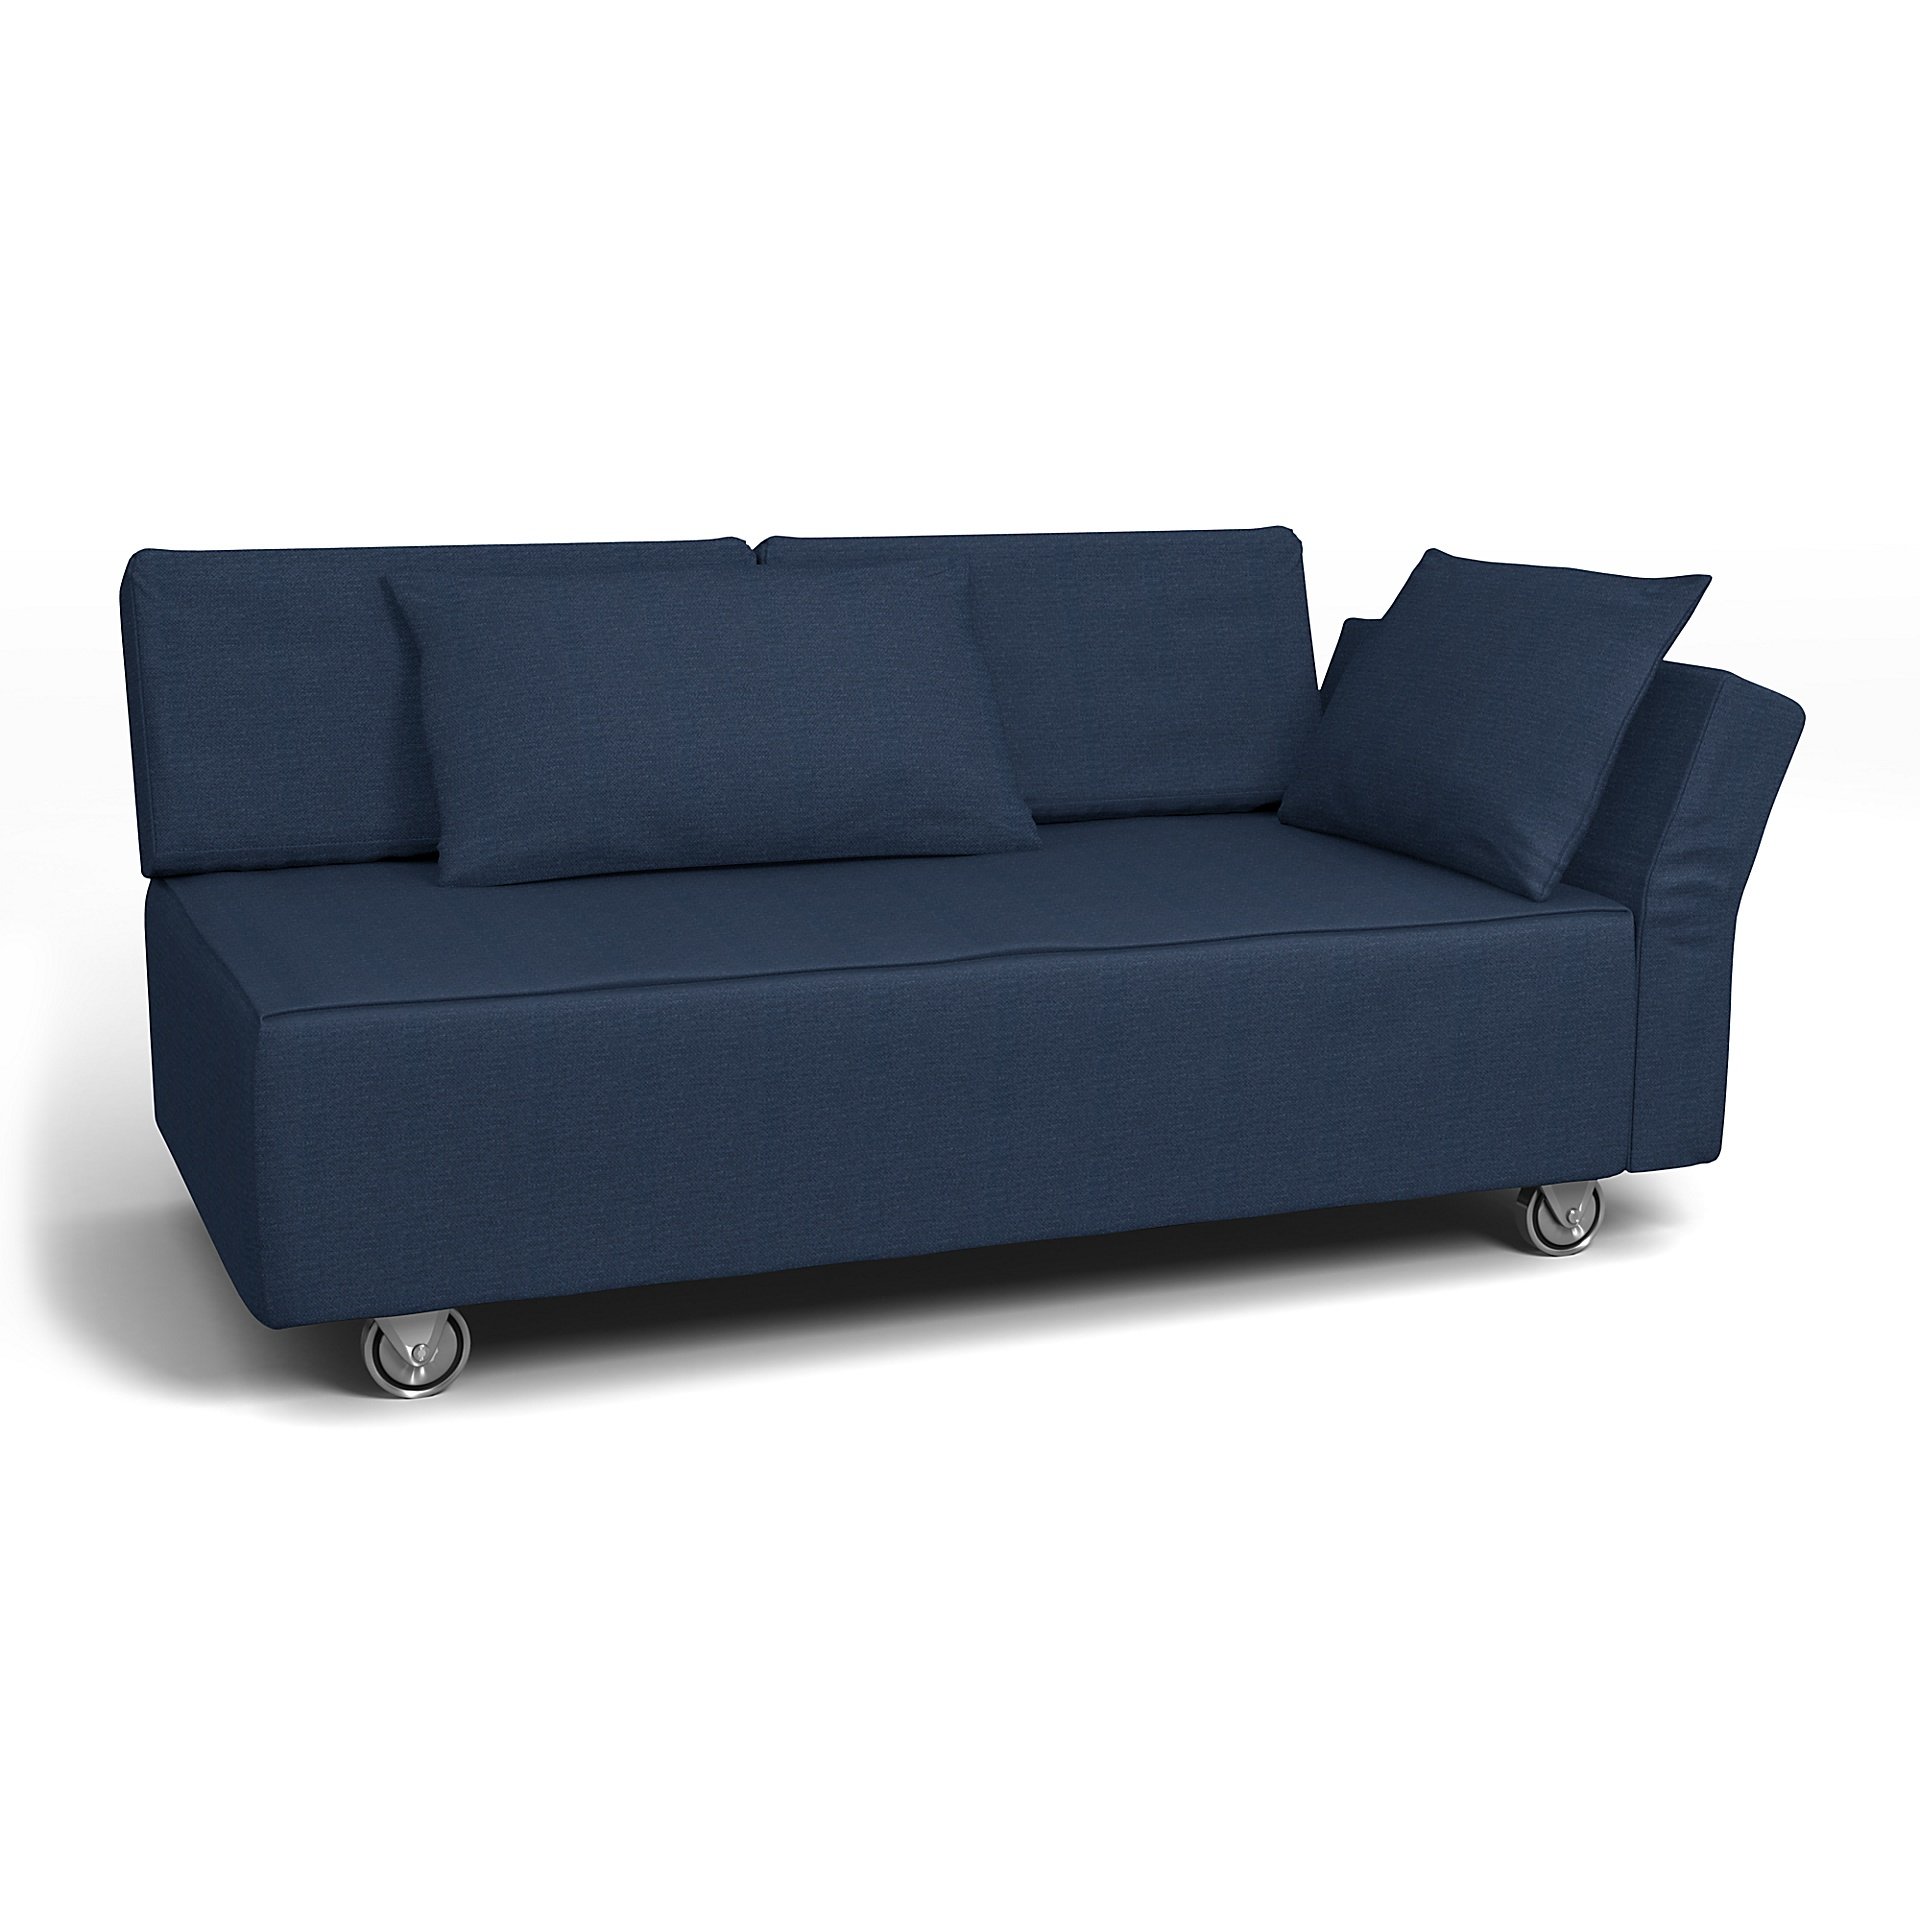 IKEA - Falsterbo 2 Seat Sofa with Right Arm Cover, Navy Blue, Linen - Bemz